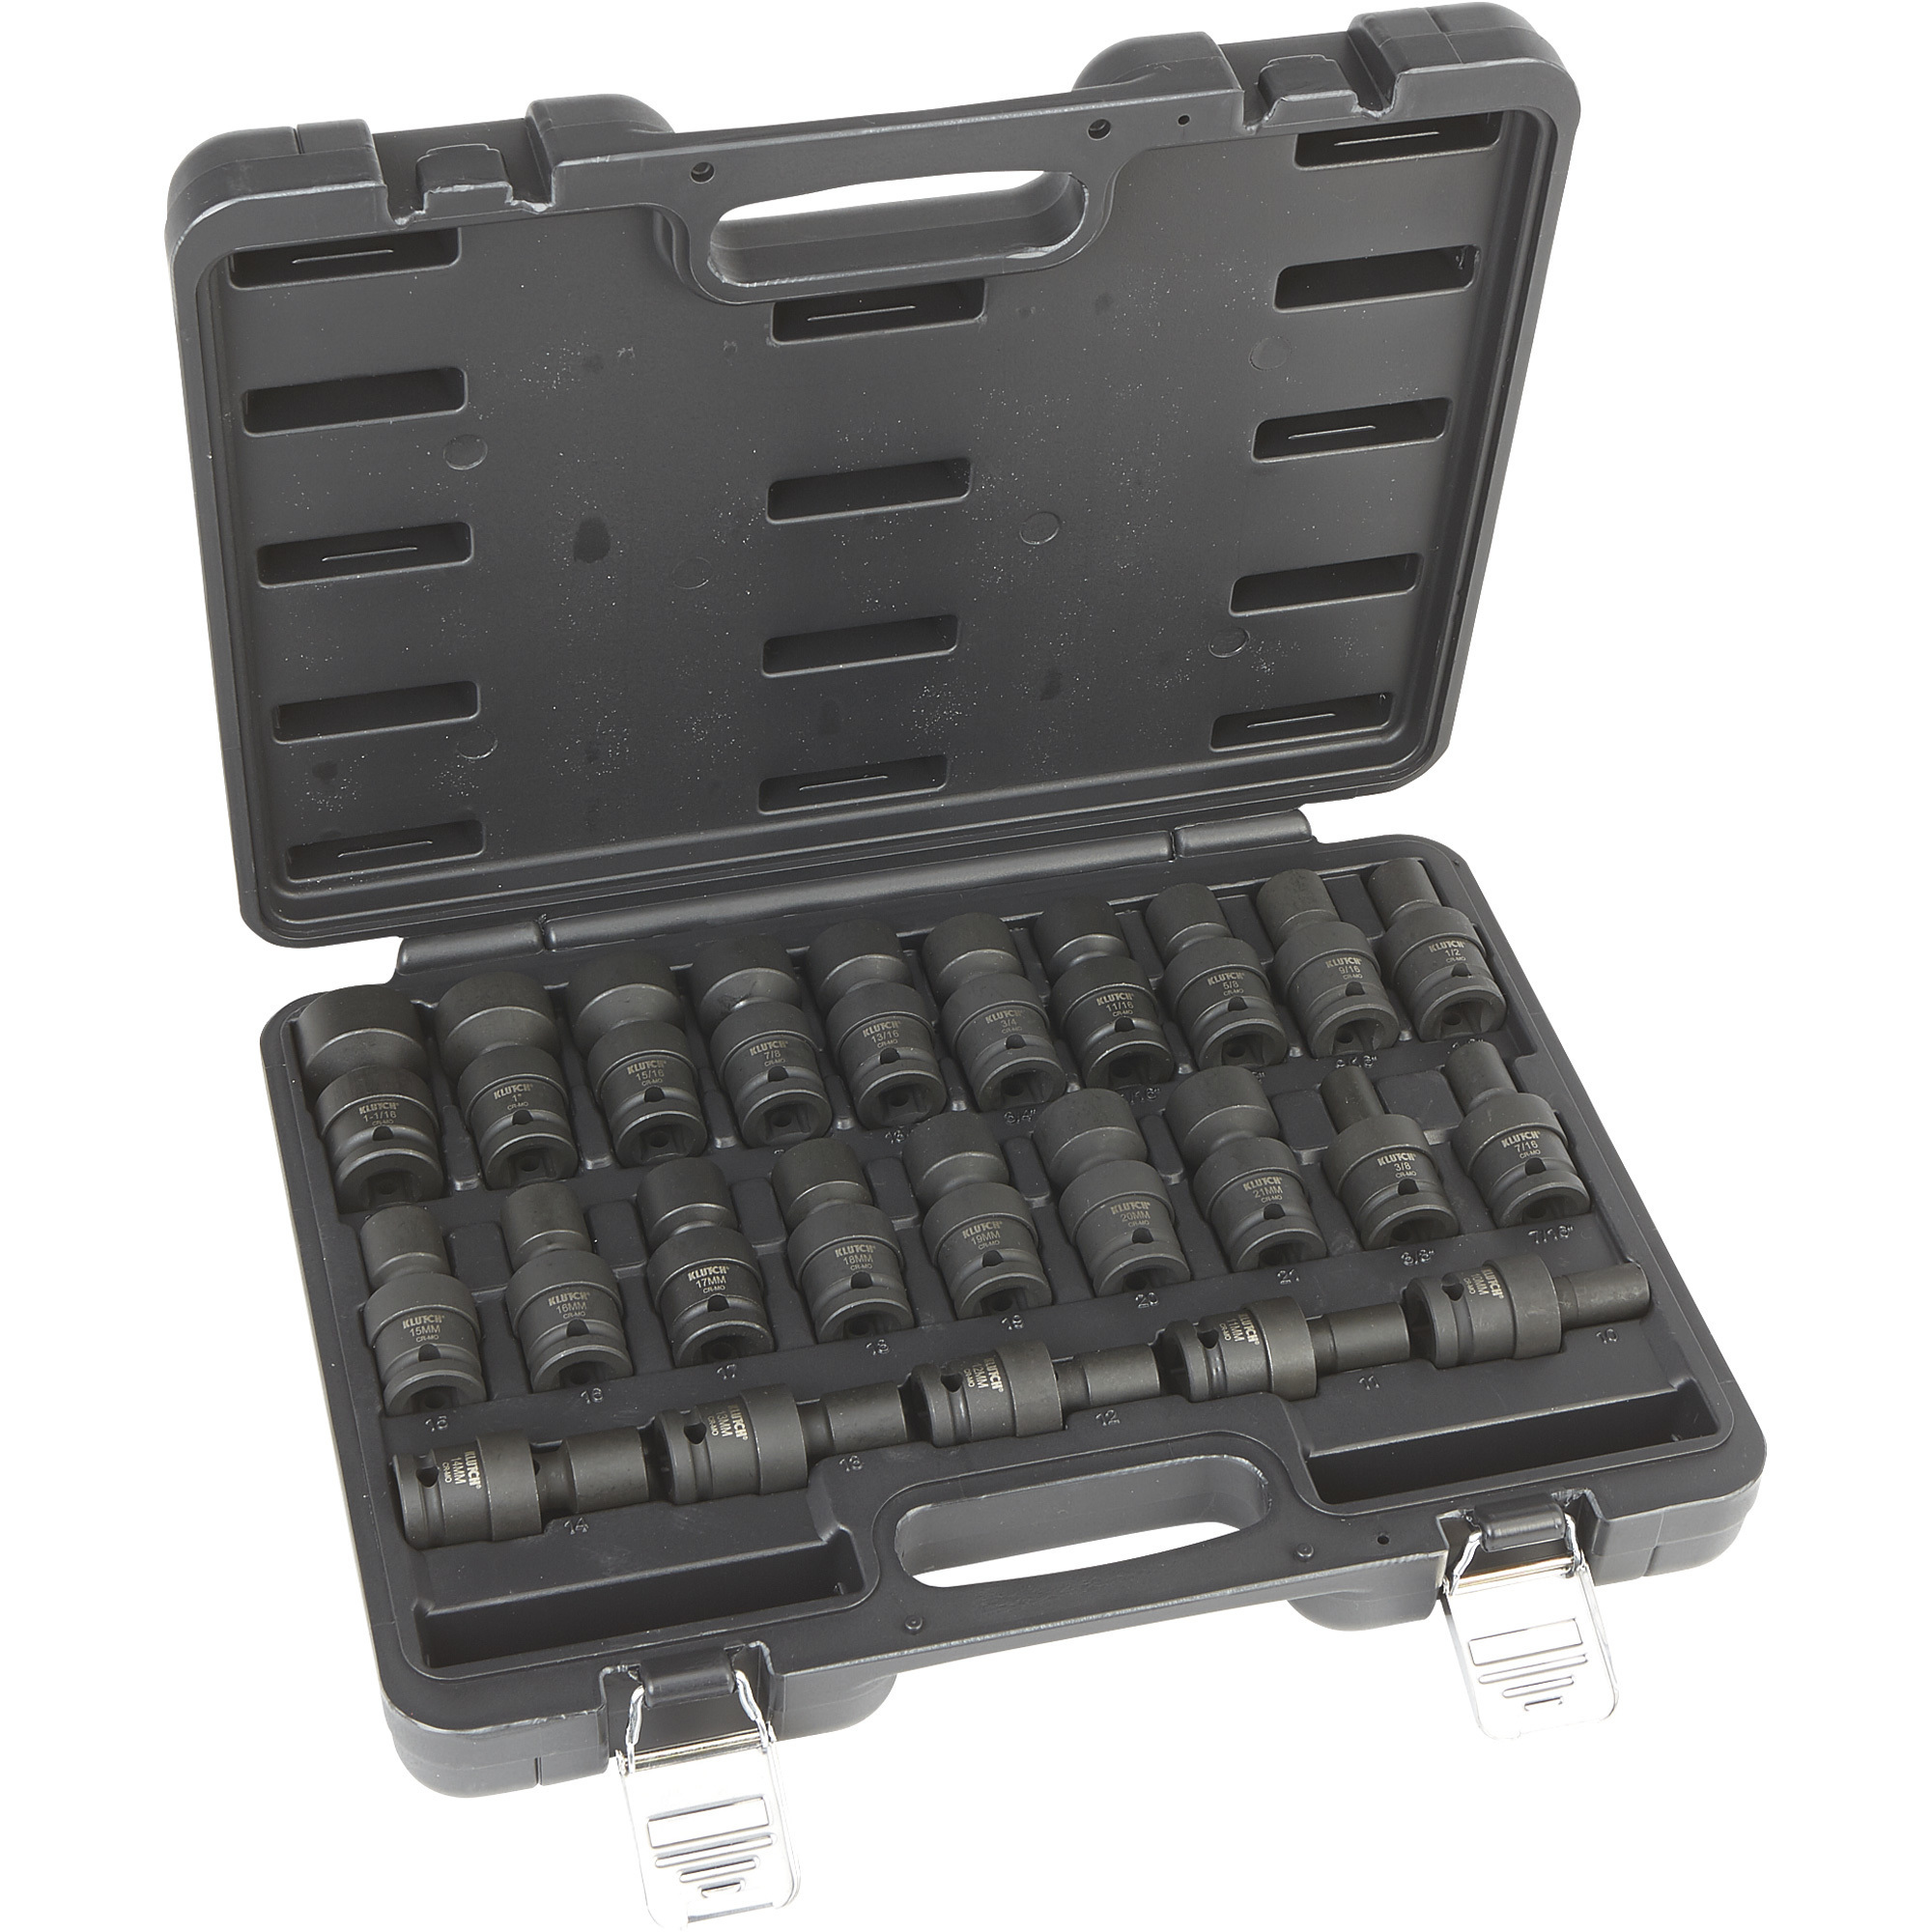 Klutch Universal Joint Impact Socket Set, 24-Pc., 1/2in. Drive